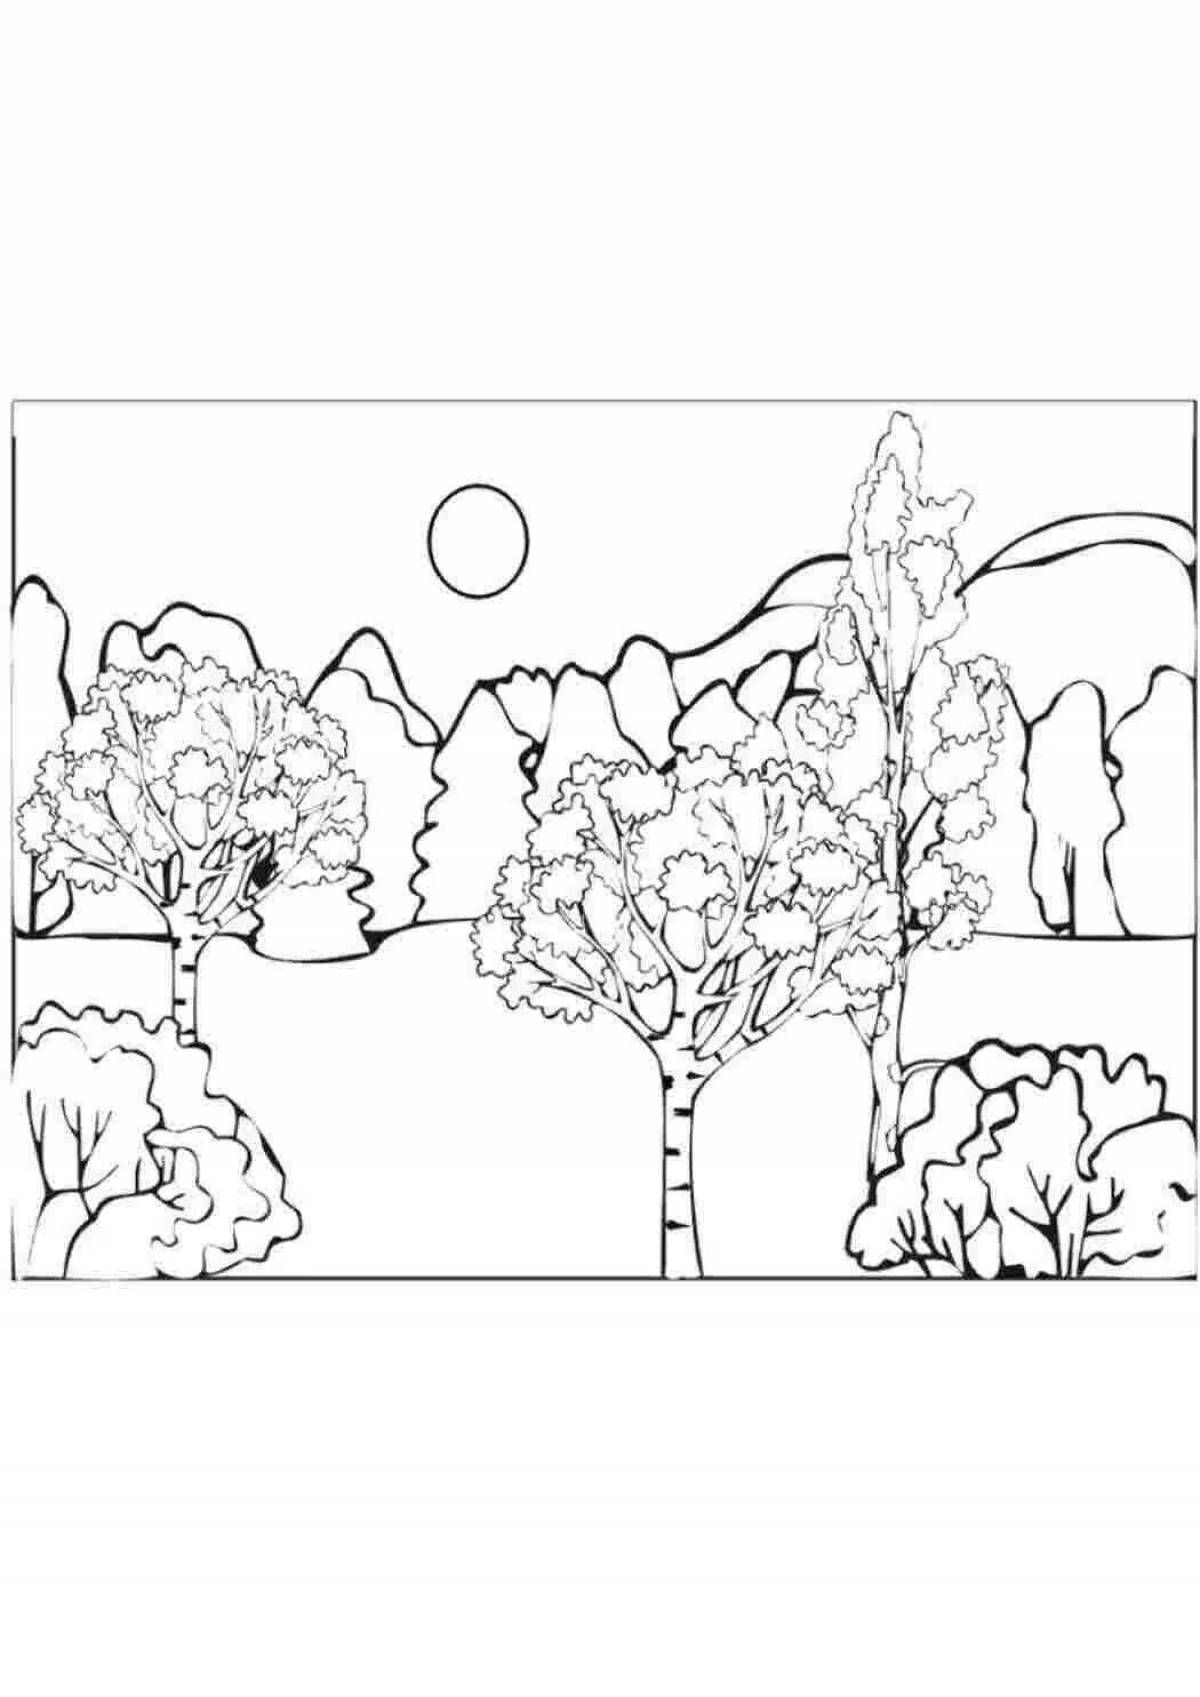 Playful 6-7 year old landscape coloring book